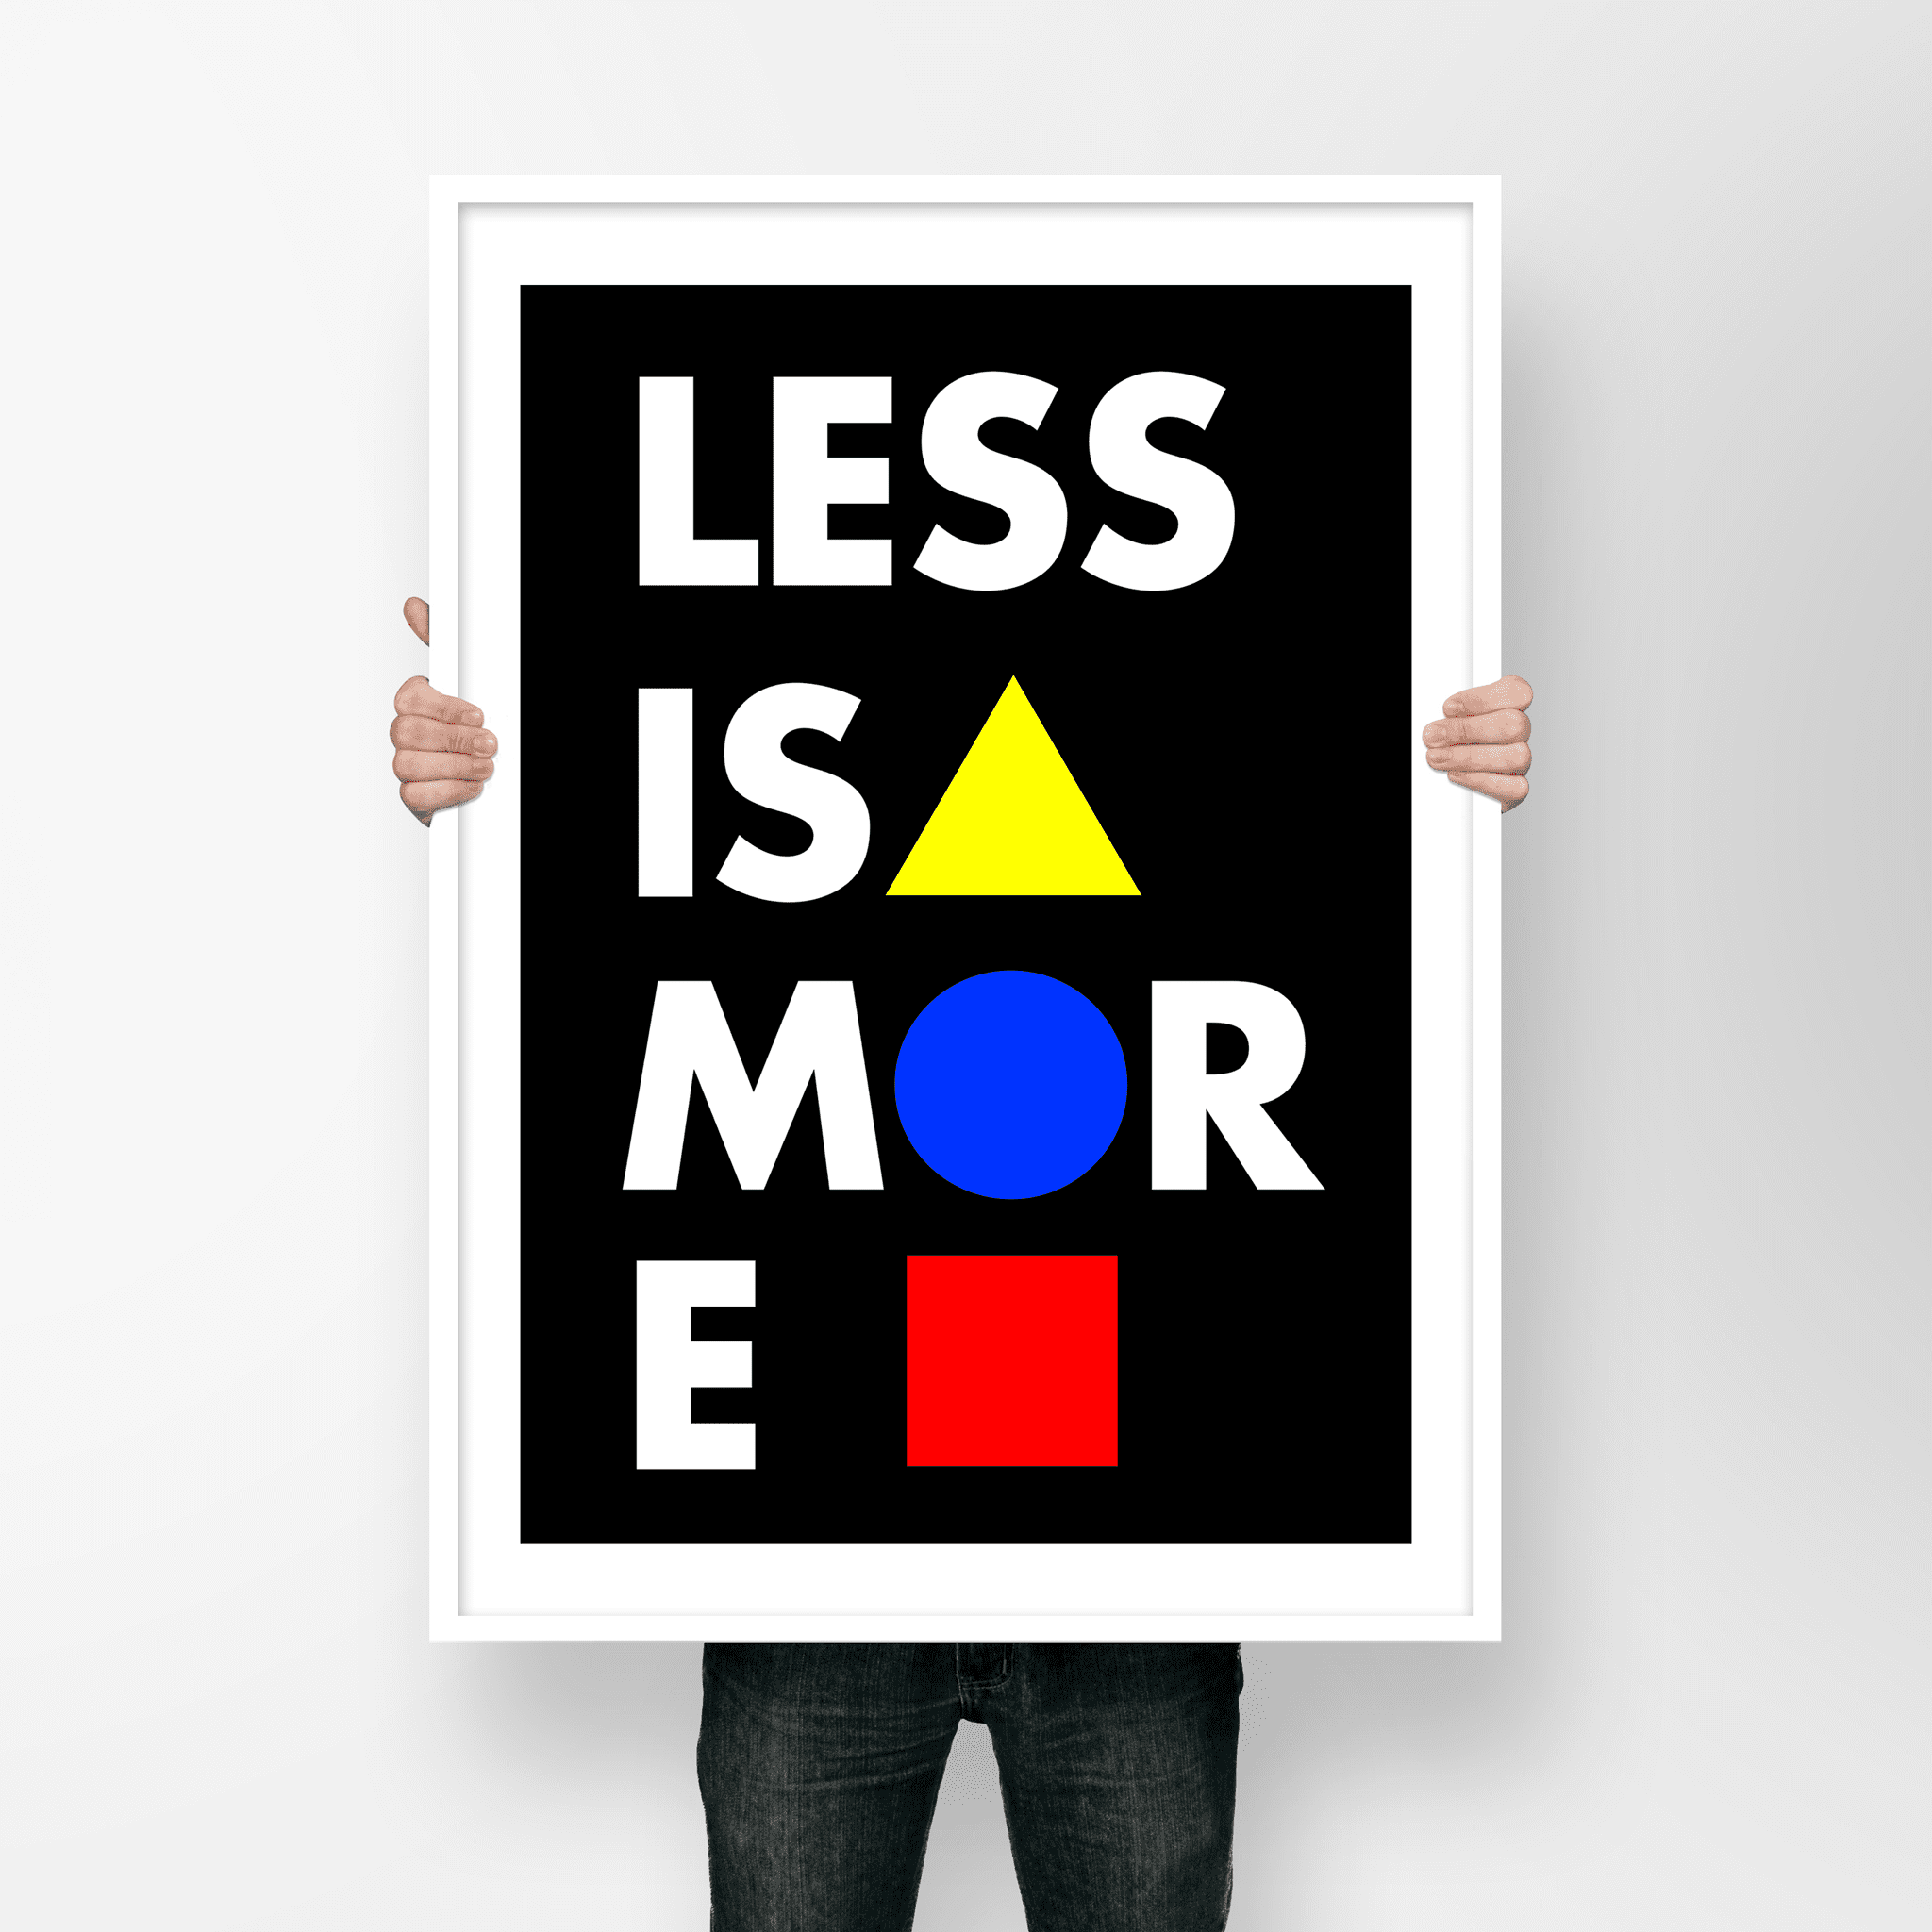 Less is moreの画像